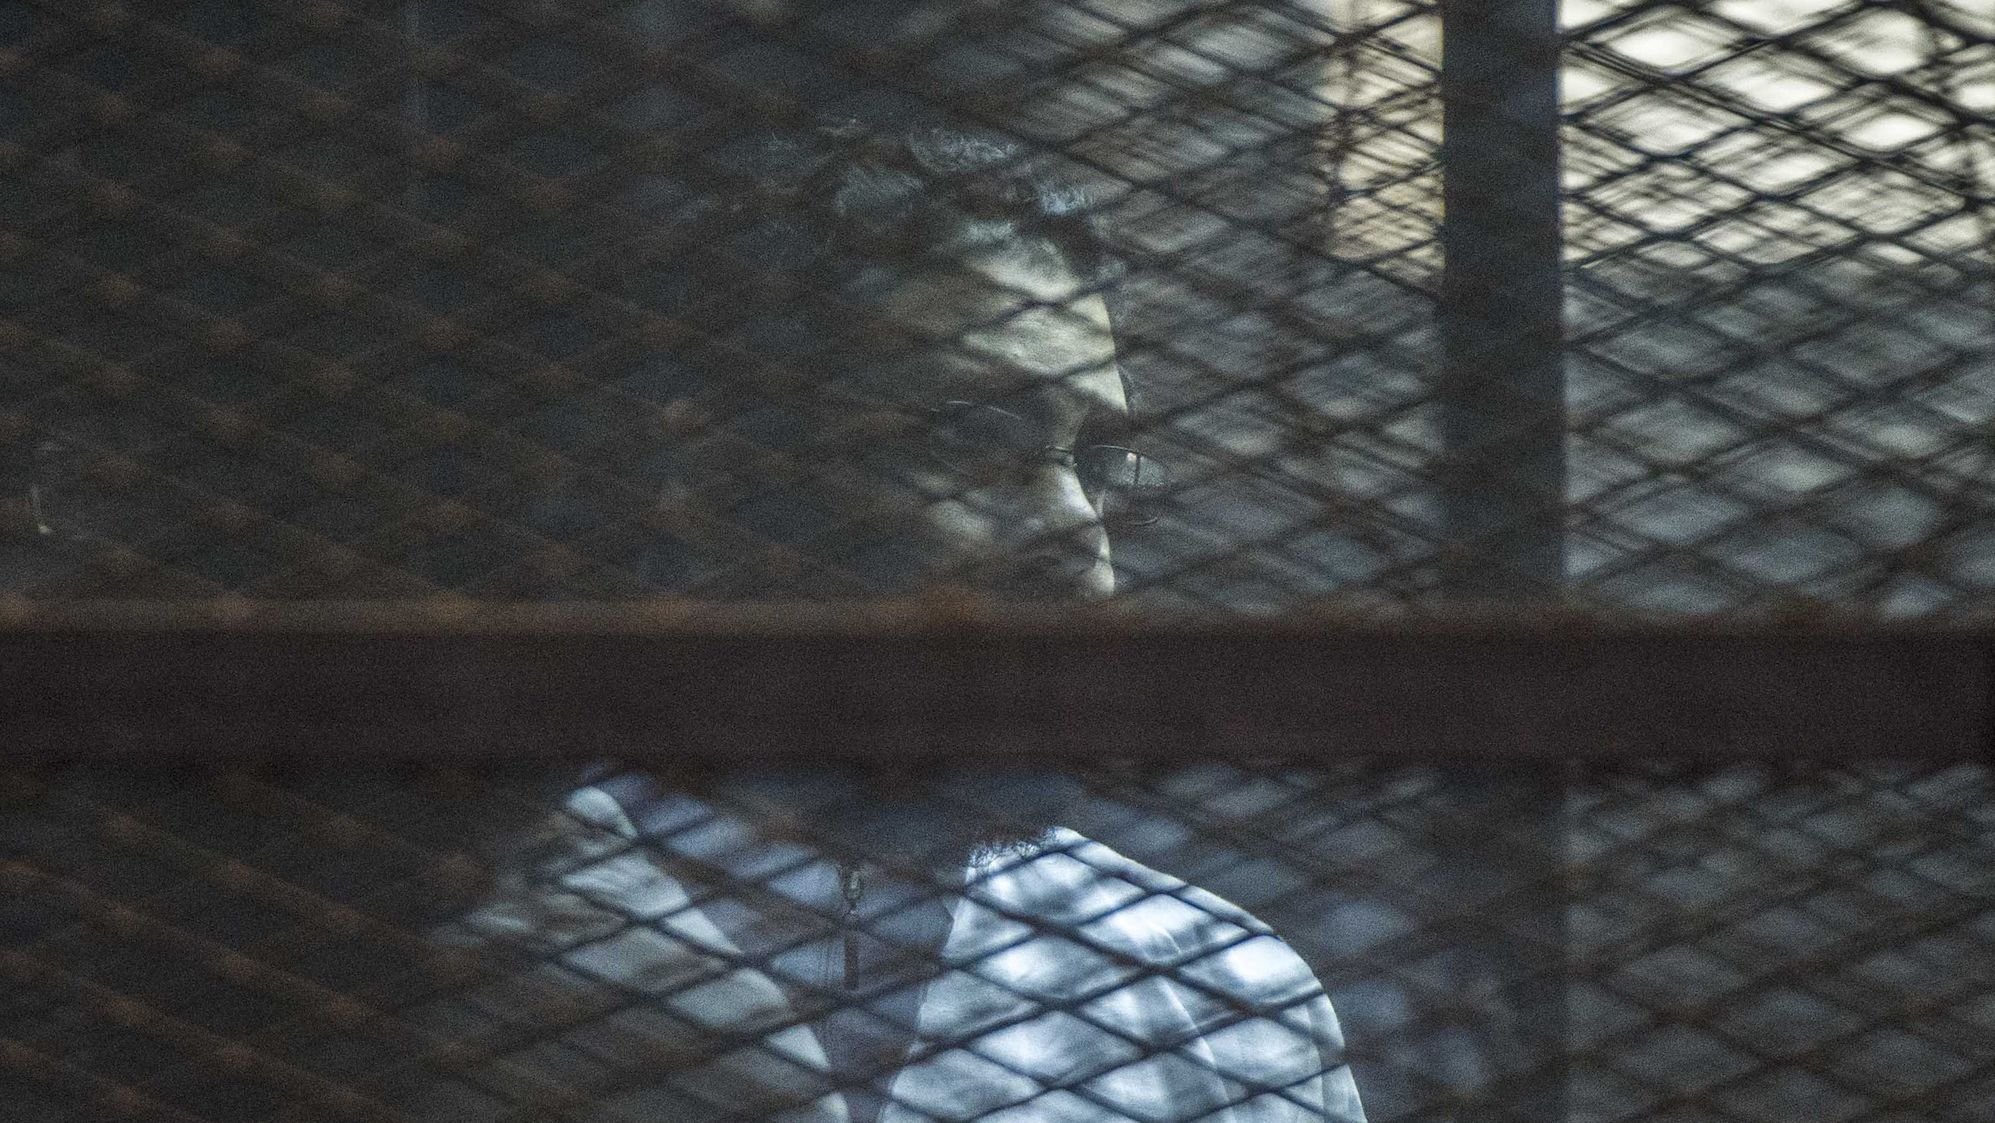 Prominent British-Egyptian activist Alaa Abd el-Fattah stands in a cage during a verdict hearing for 21 people over an unauthorized street protest in 2013, in a courtroom in Cairo, Egypt in 2015.